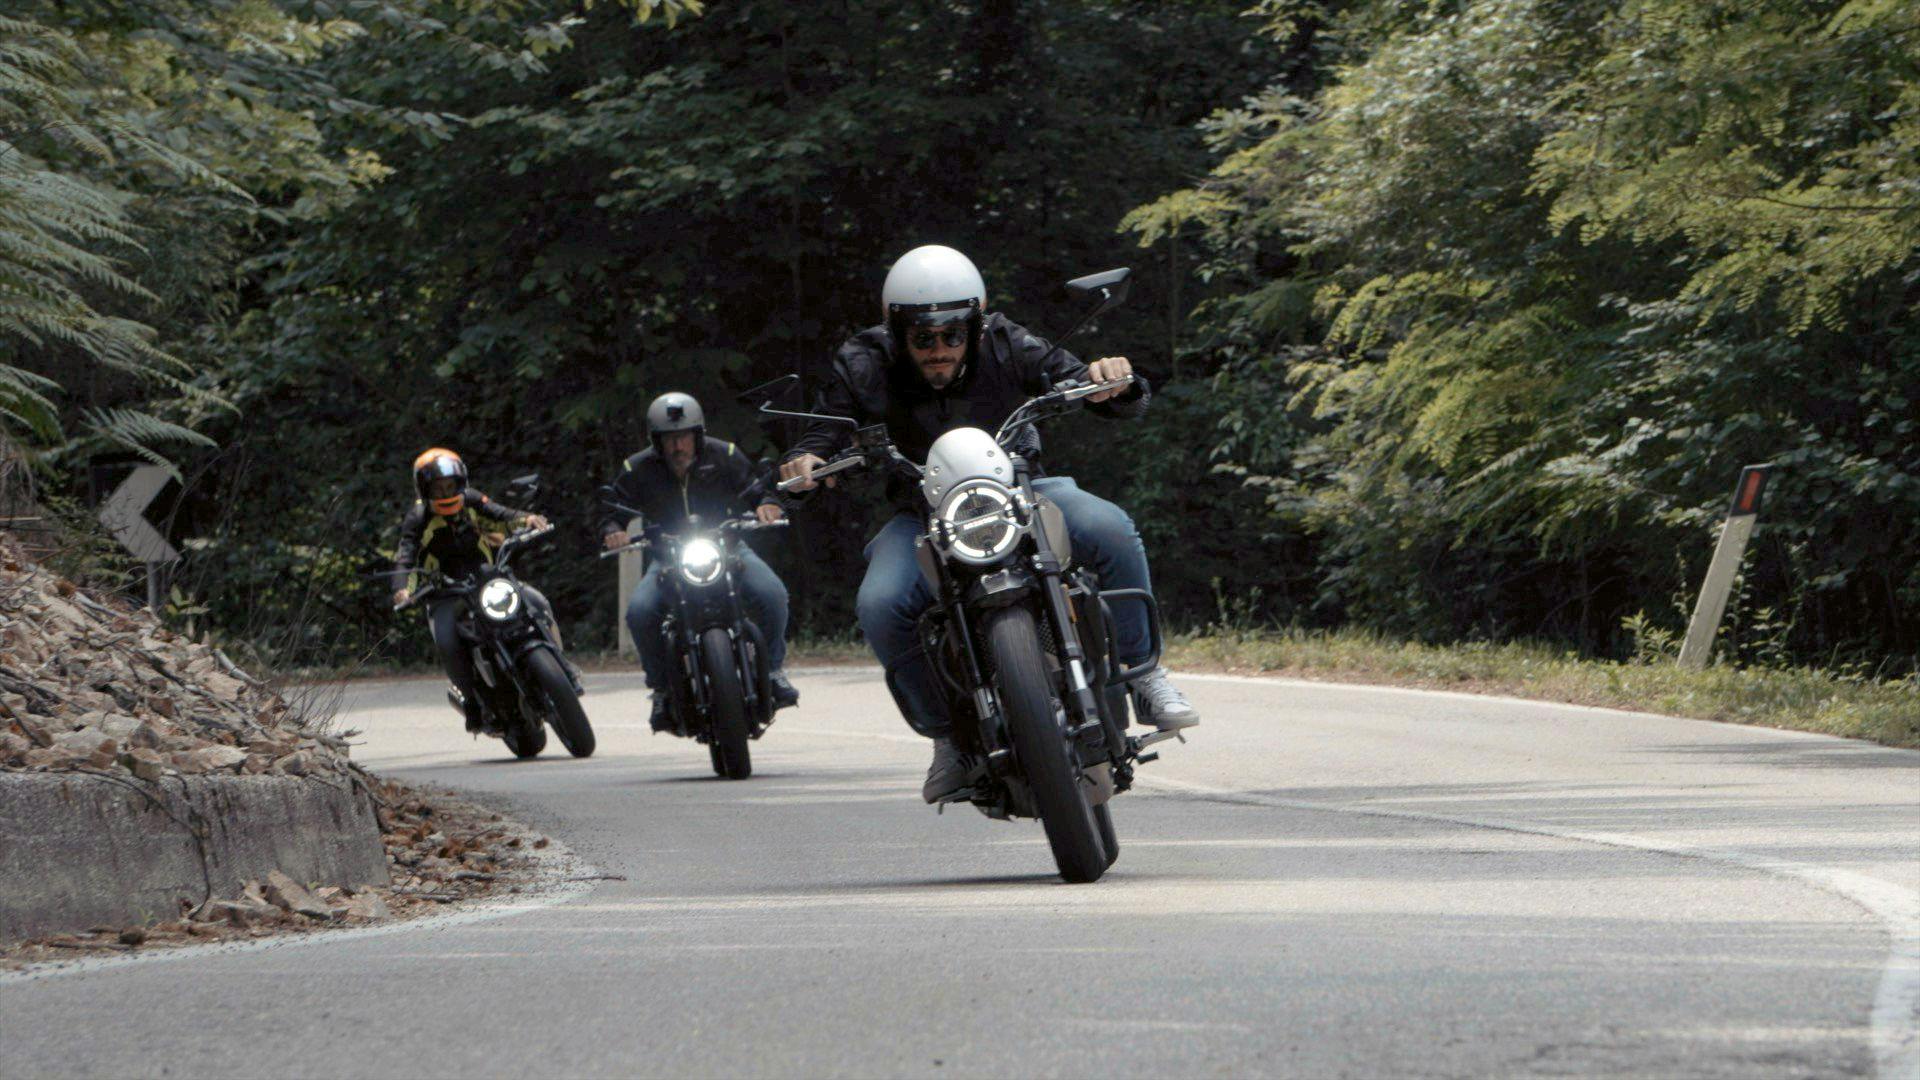 Three Brixton motorcycle riders on their Brixtons riding up a mountain road